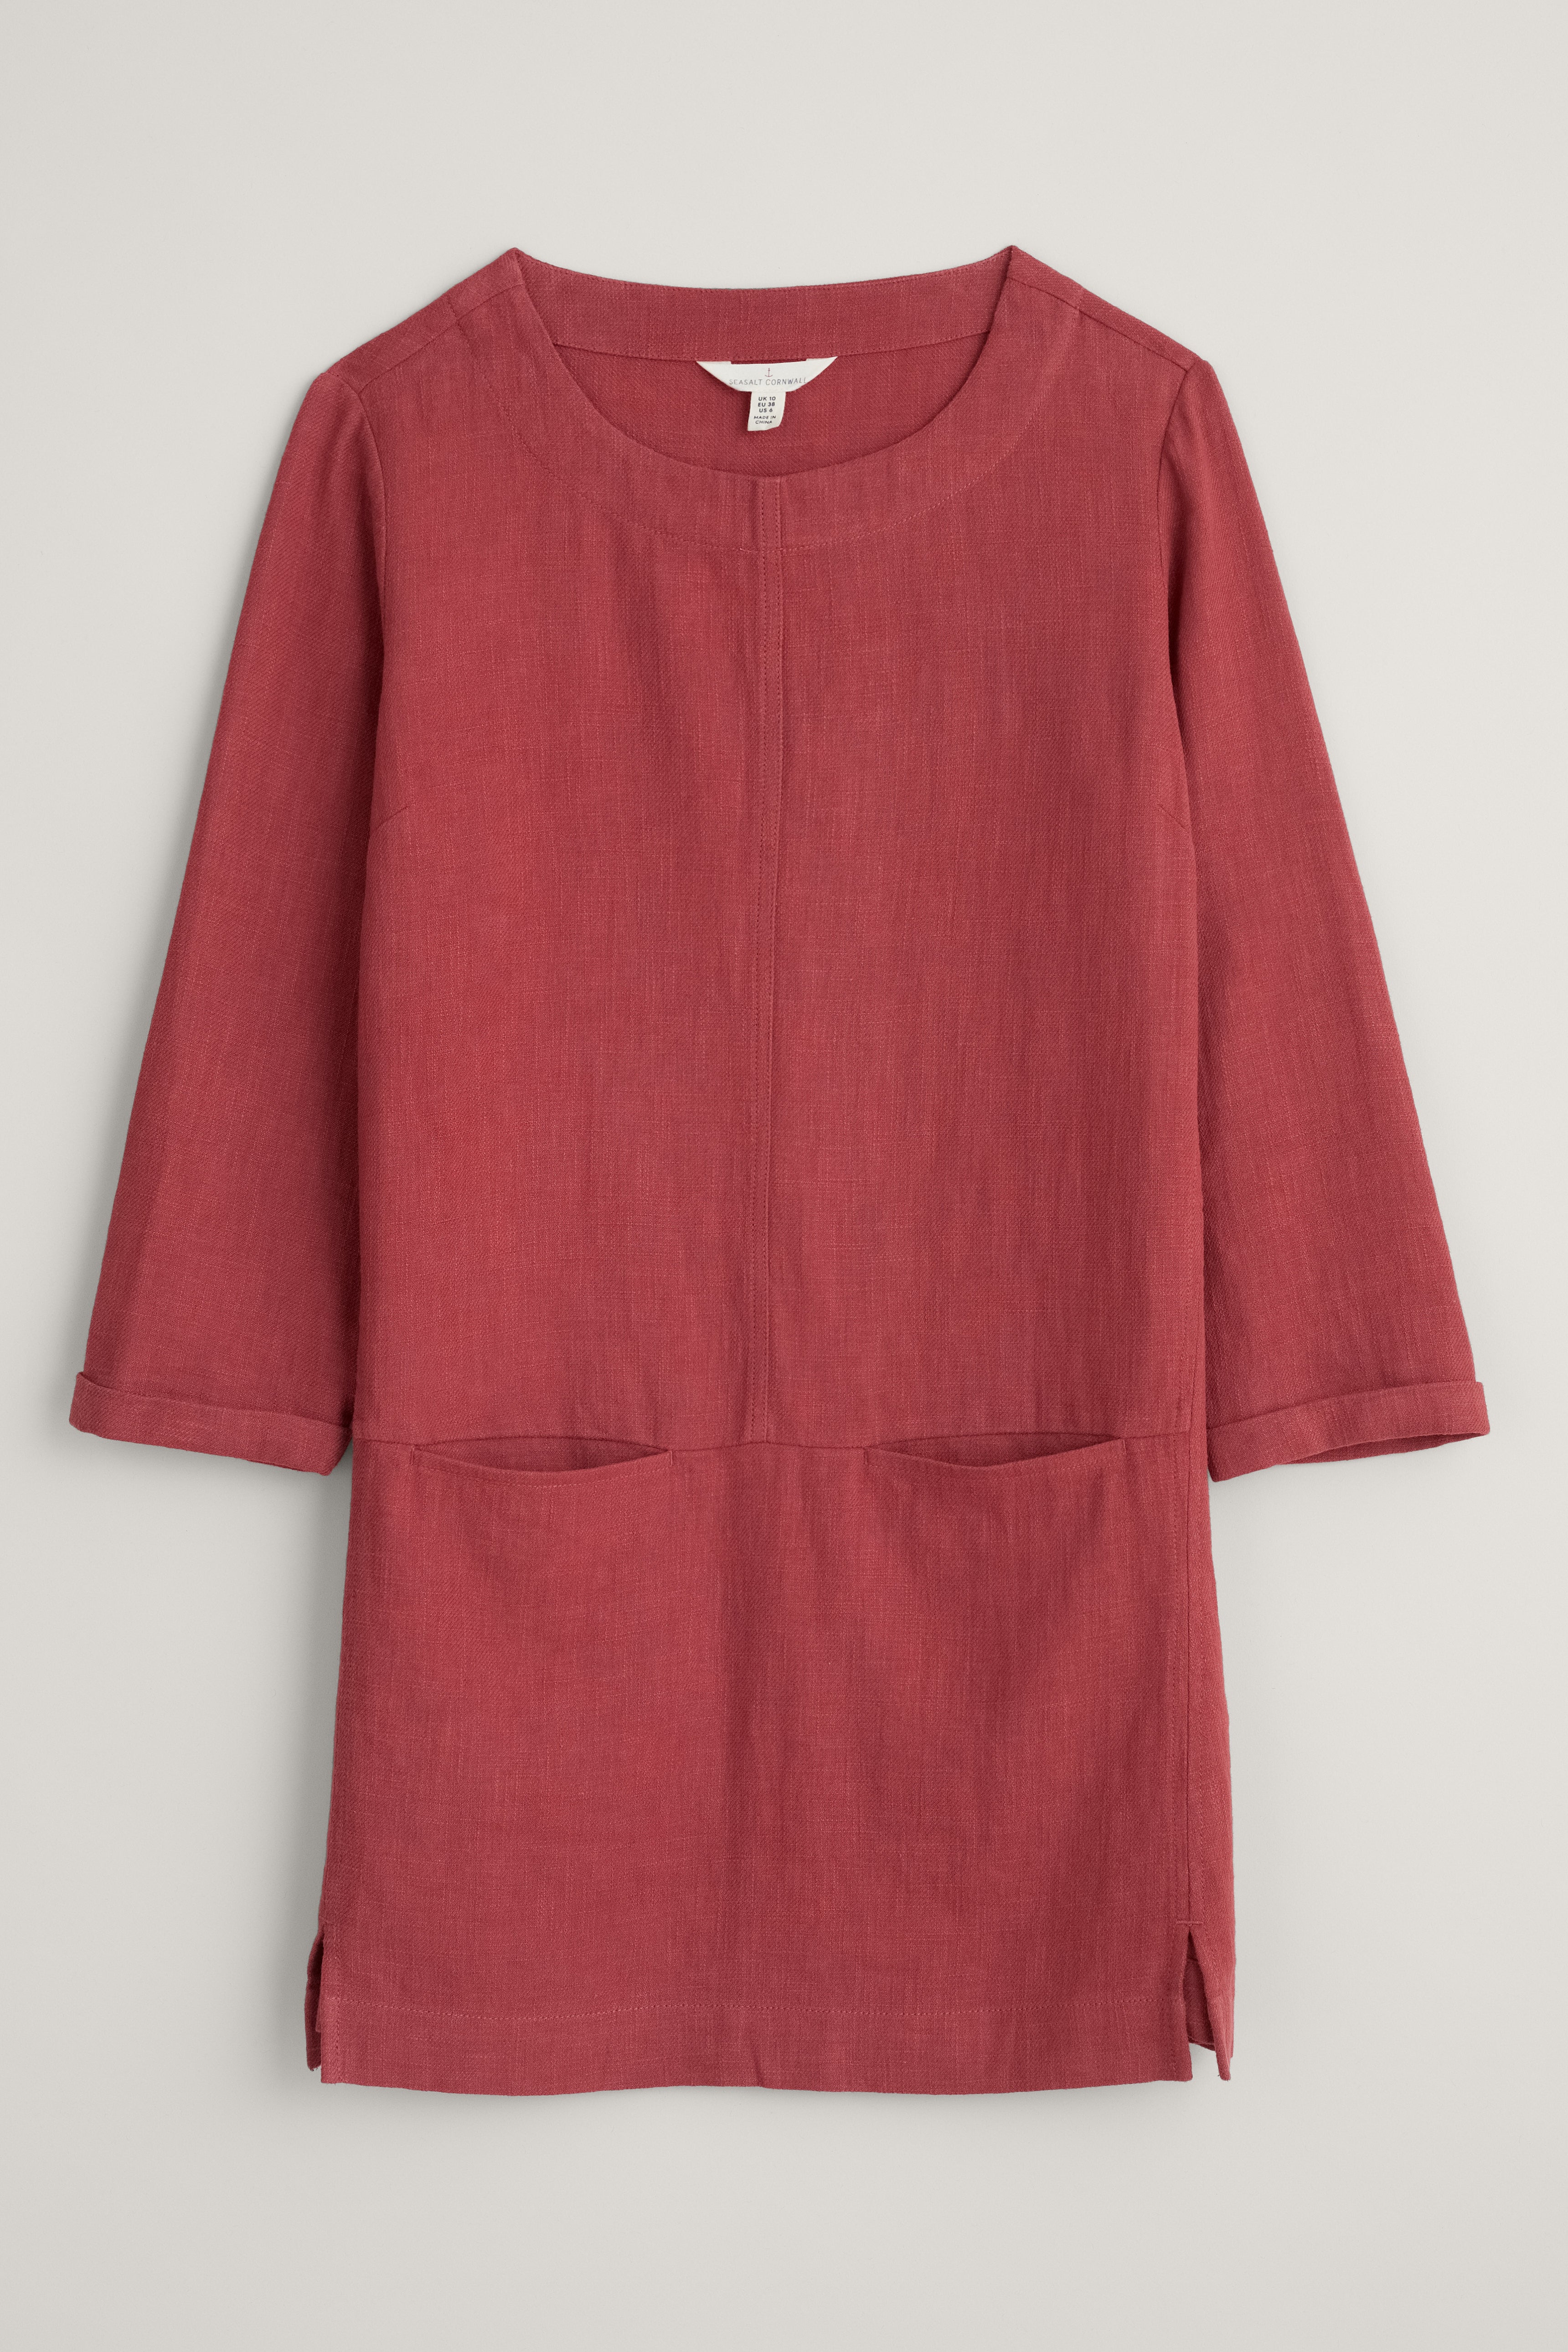 Seasalt St Agnes Clay Tunic - Red Berry